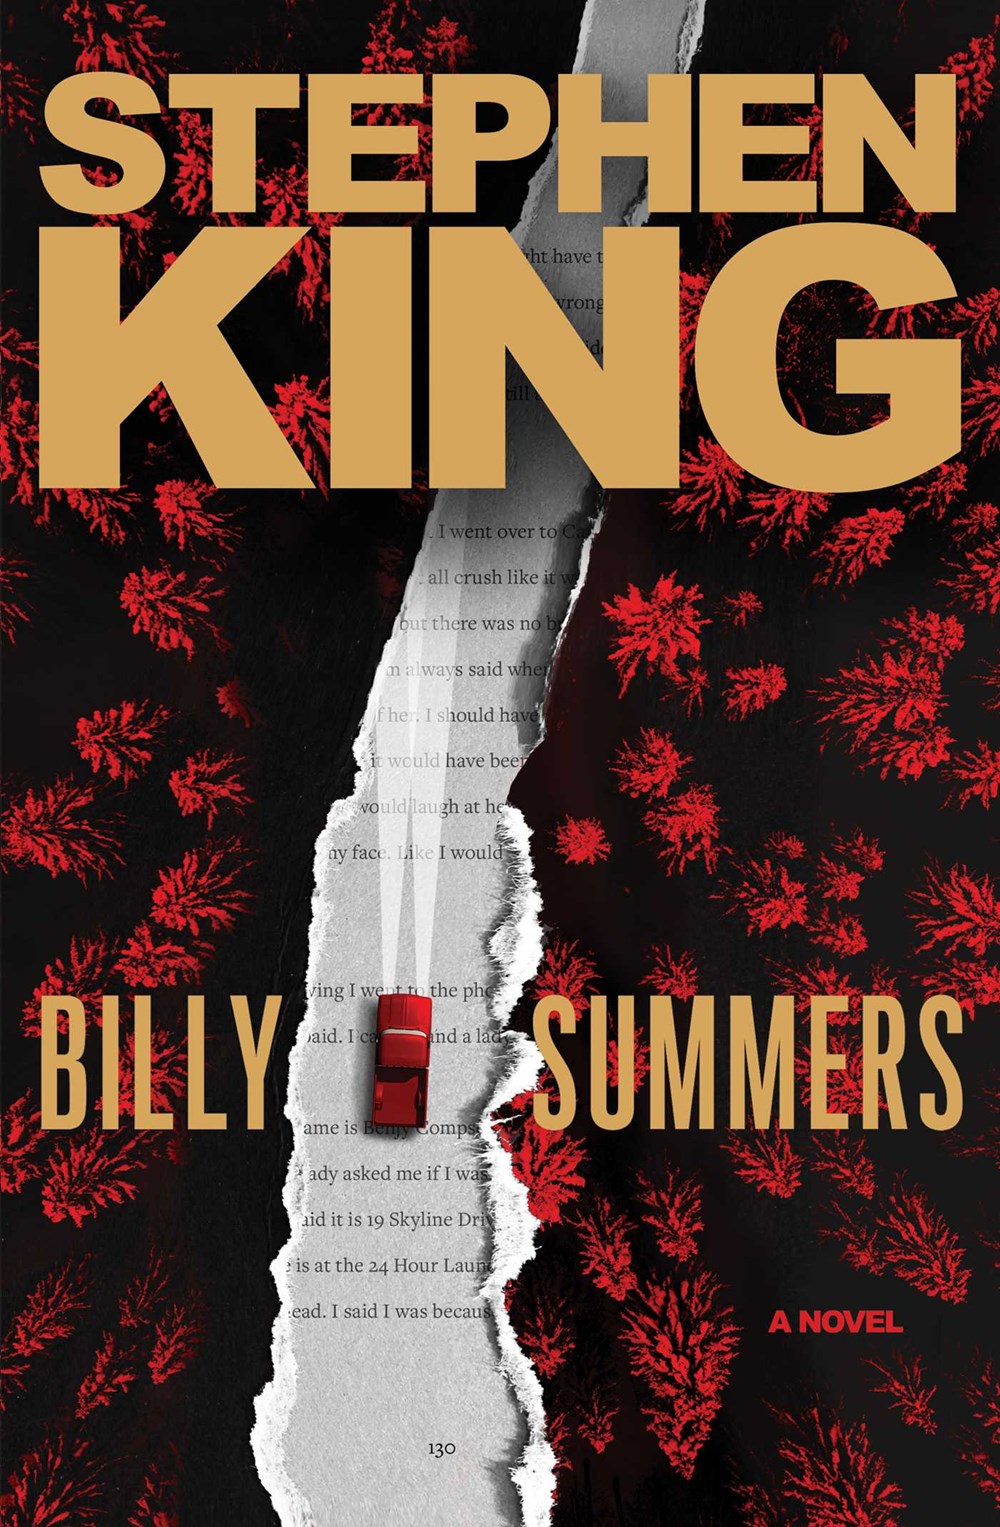 Read-Alikes for ‘Billy Summers’ by Stephen King | LibraryReads